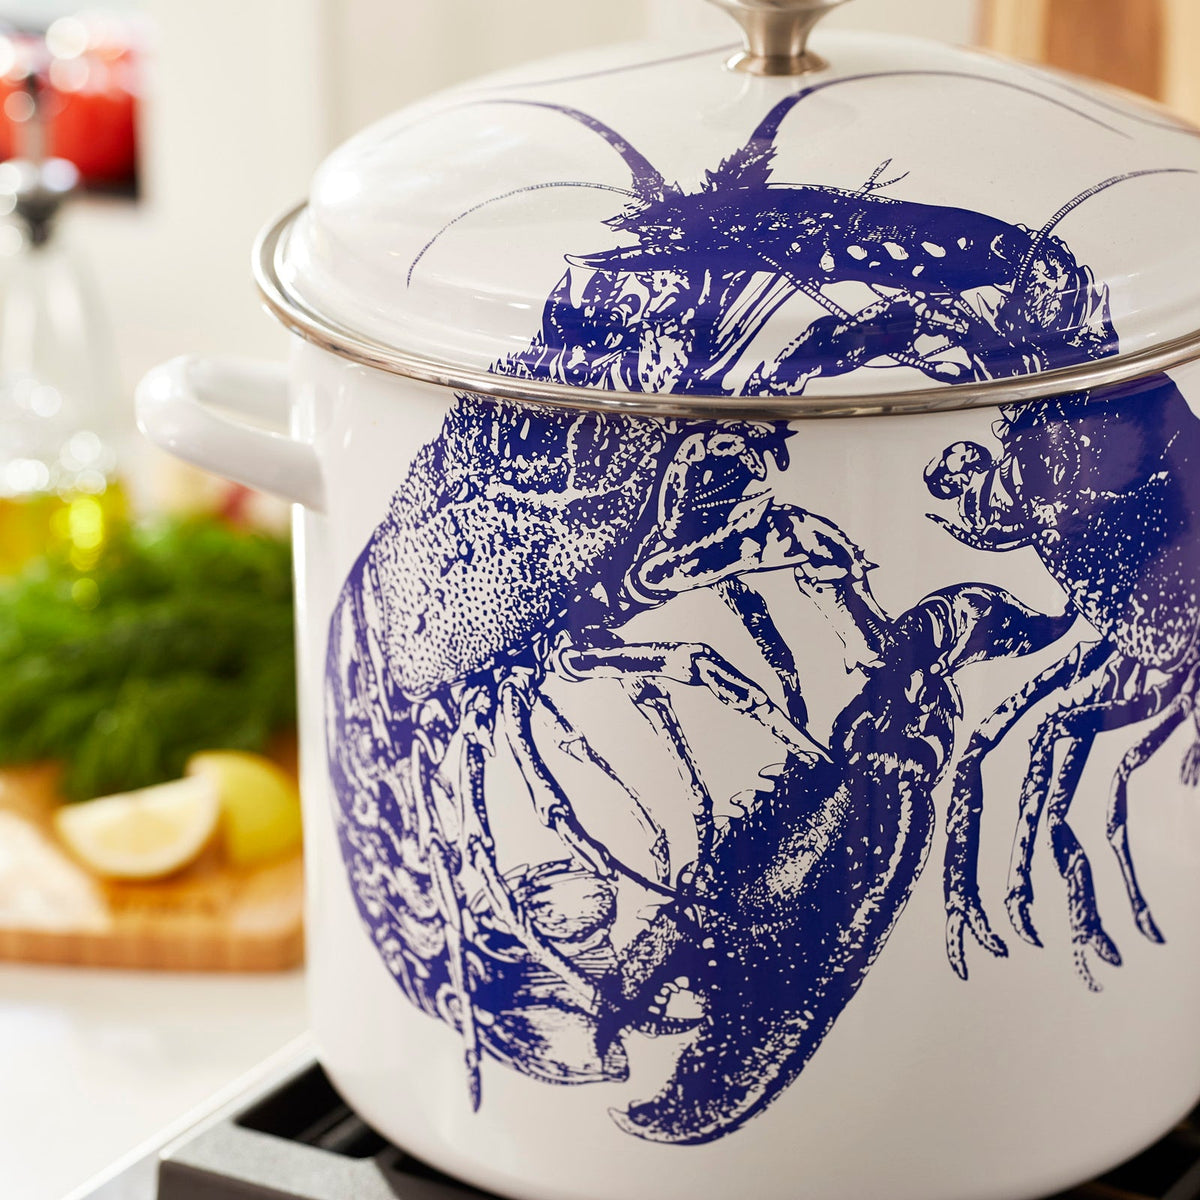 A blue and white Caskata X Cuisinart Limited Edition Lobster 16 Qt. Enamel on Steel Stockpot, perfect for clambakes.